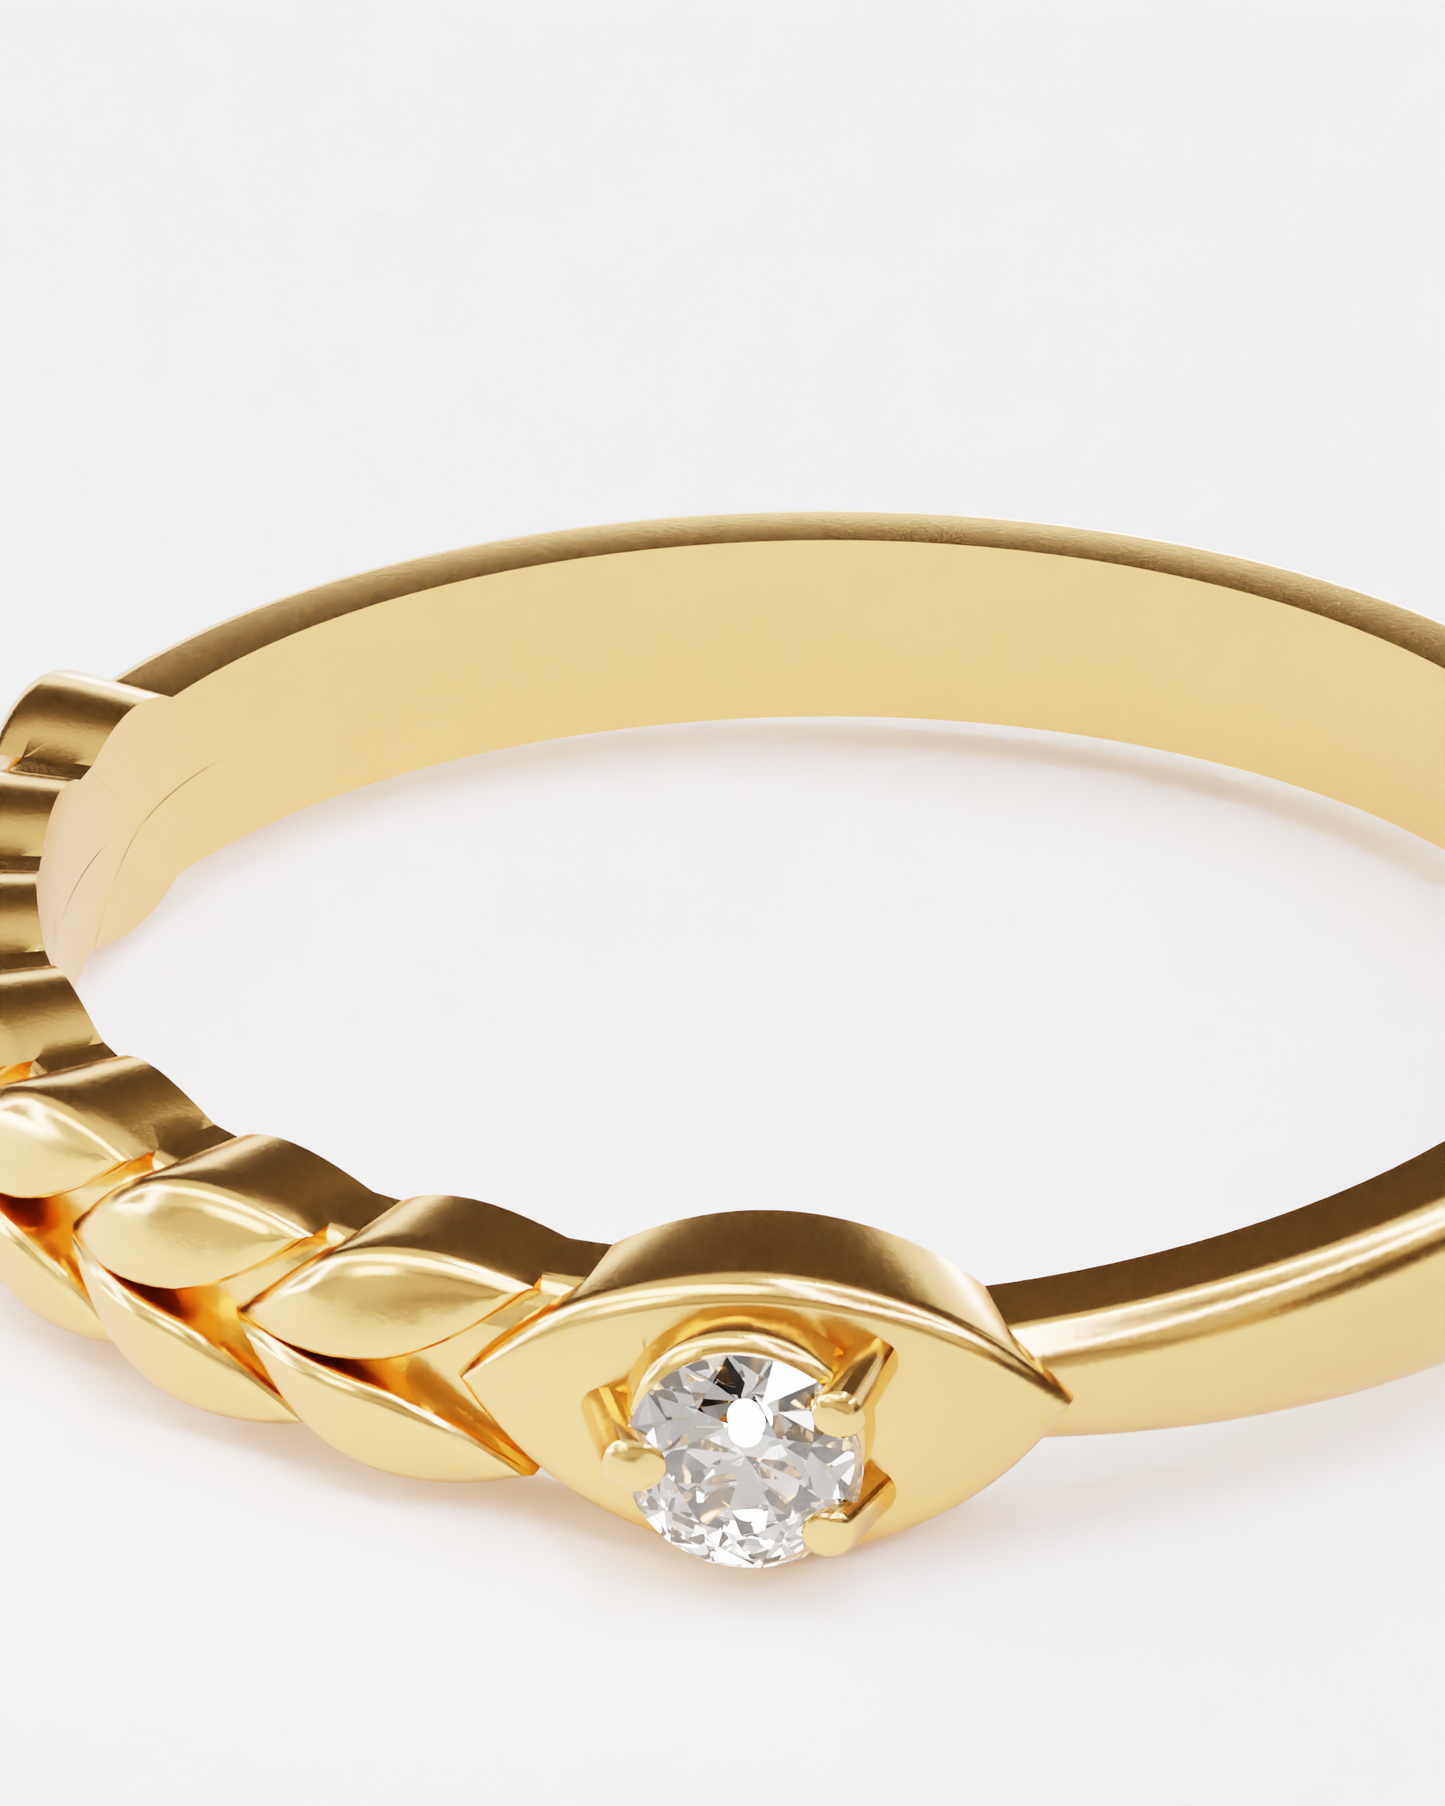 Gold Spikelets mini ring with diamond